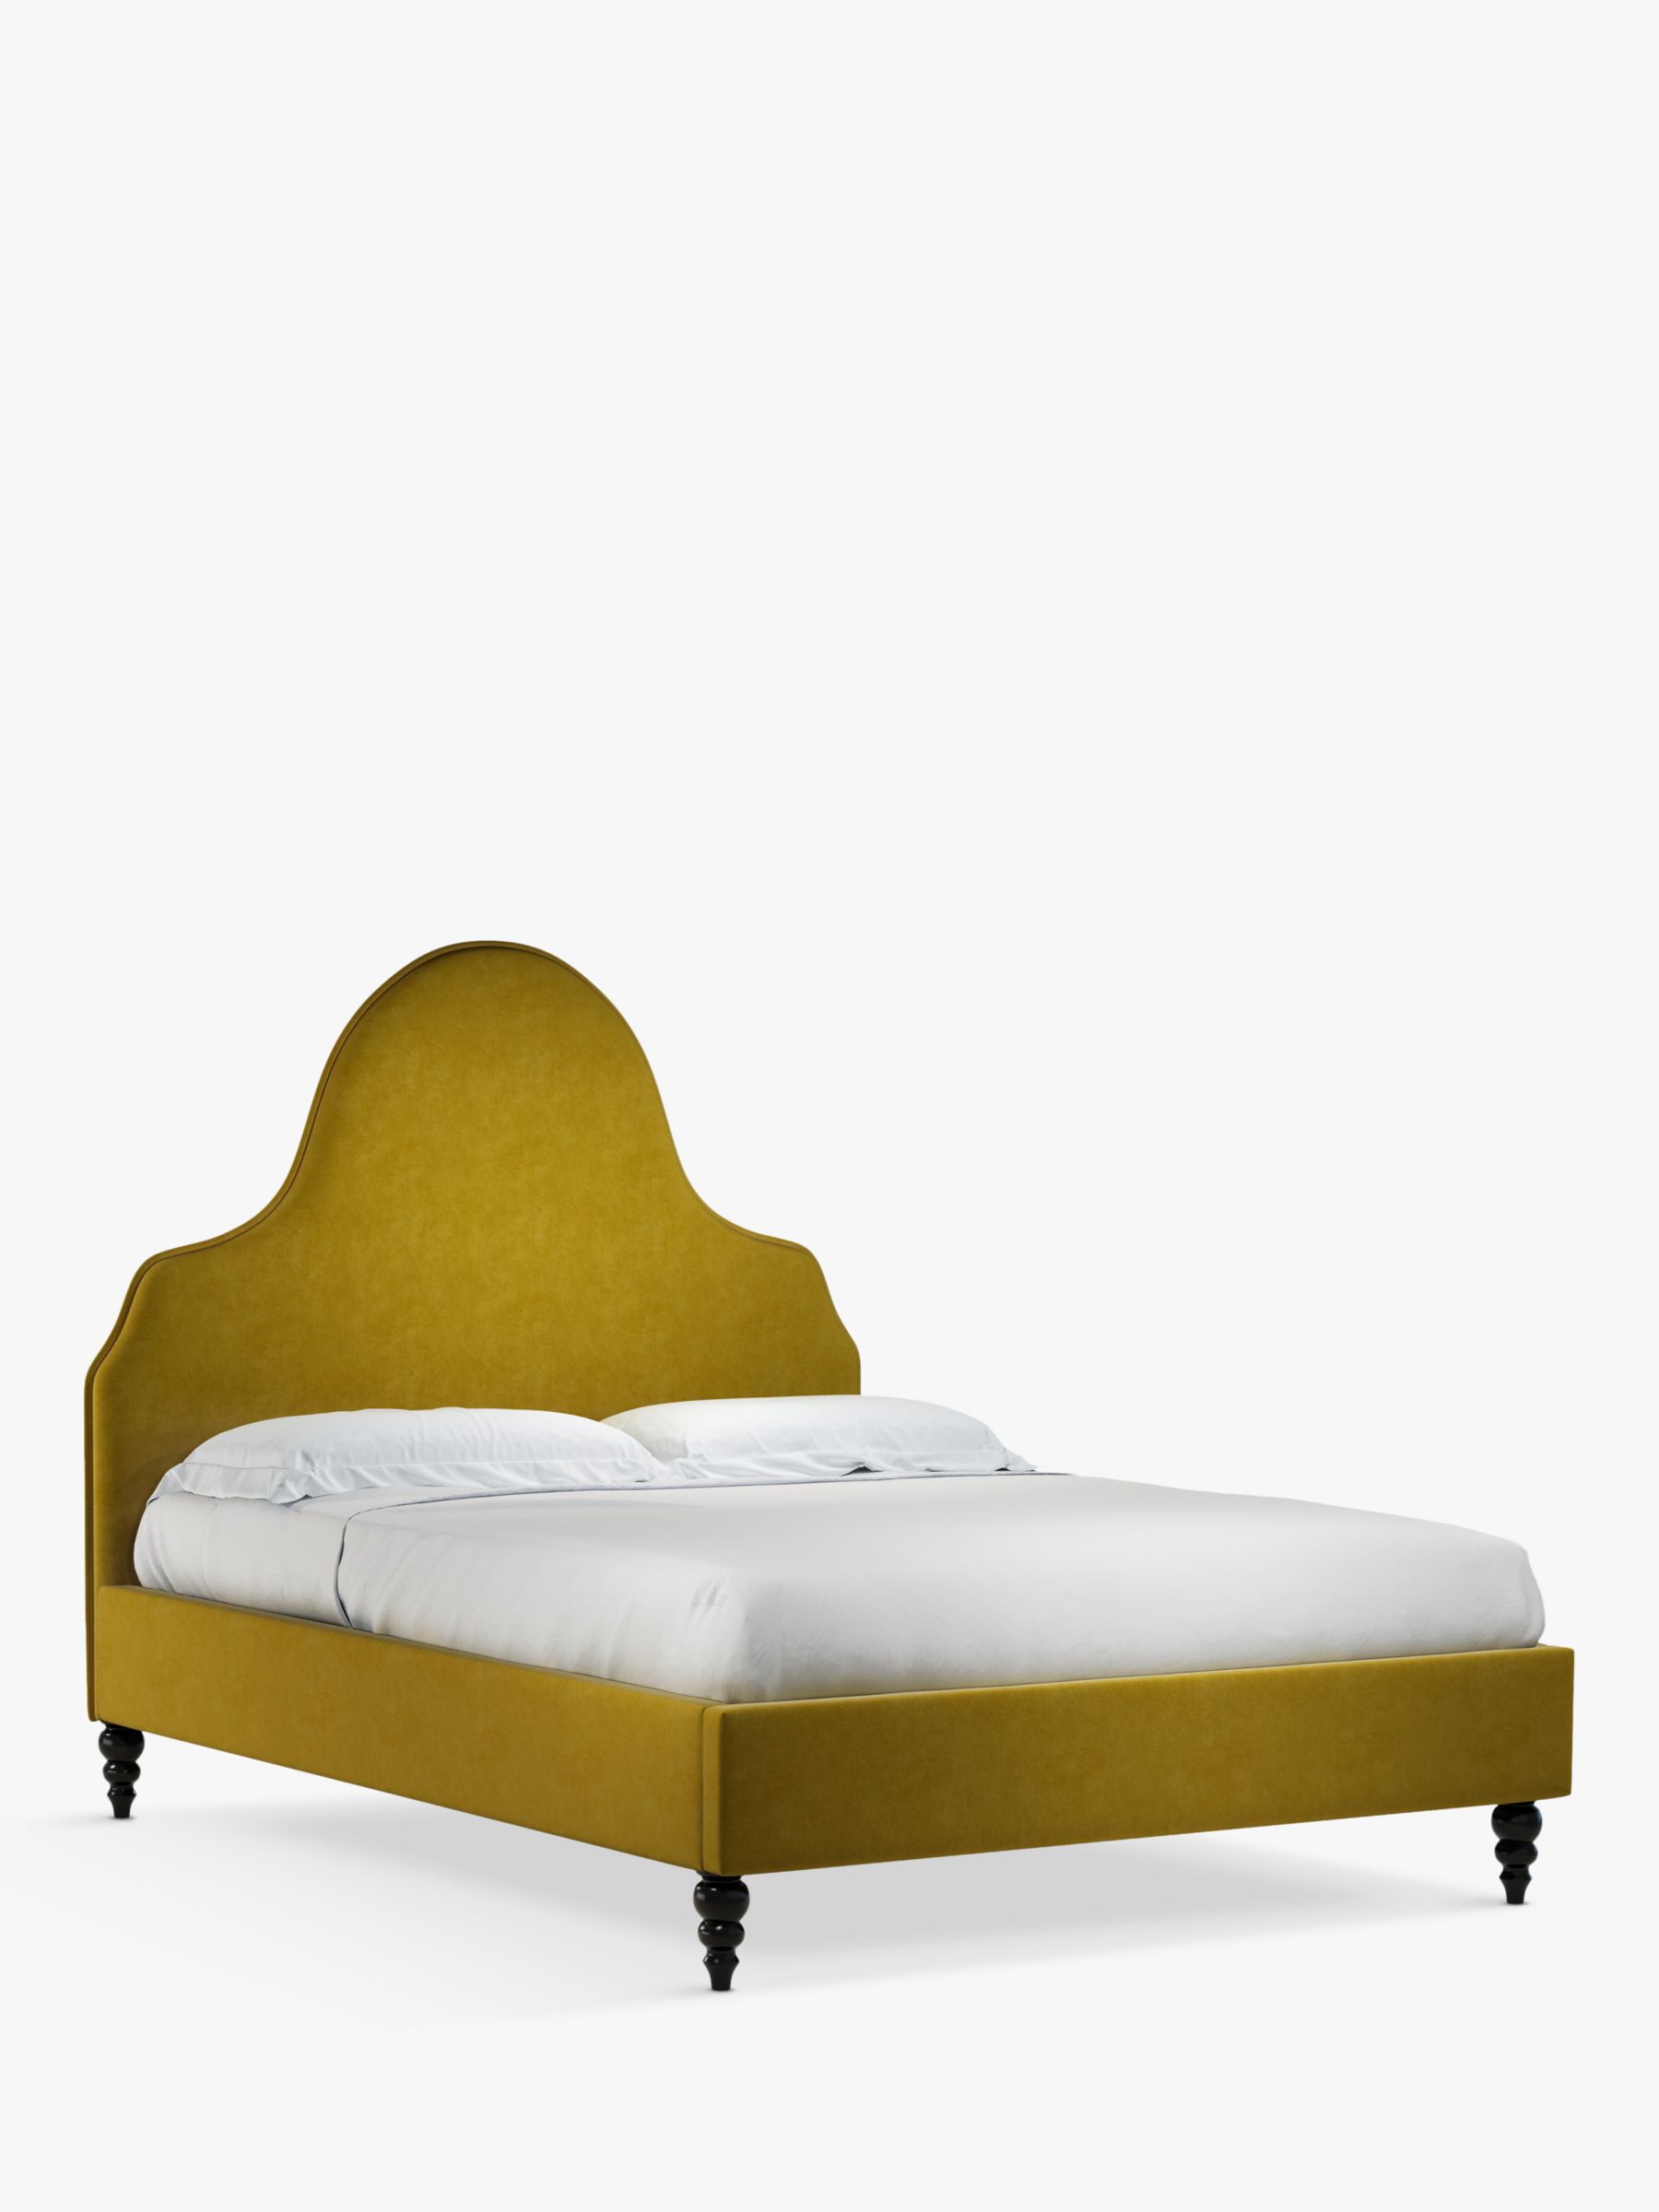 John Lewis Silhouette Upholstered Bed Frame, King Size, Aquaclean Harriet Mustard £879.00